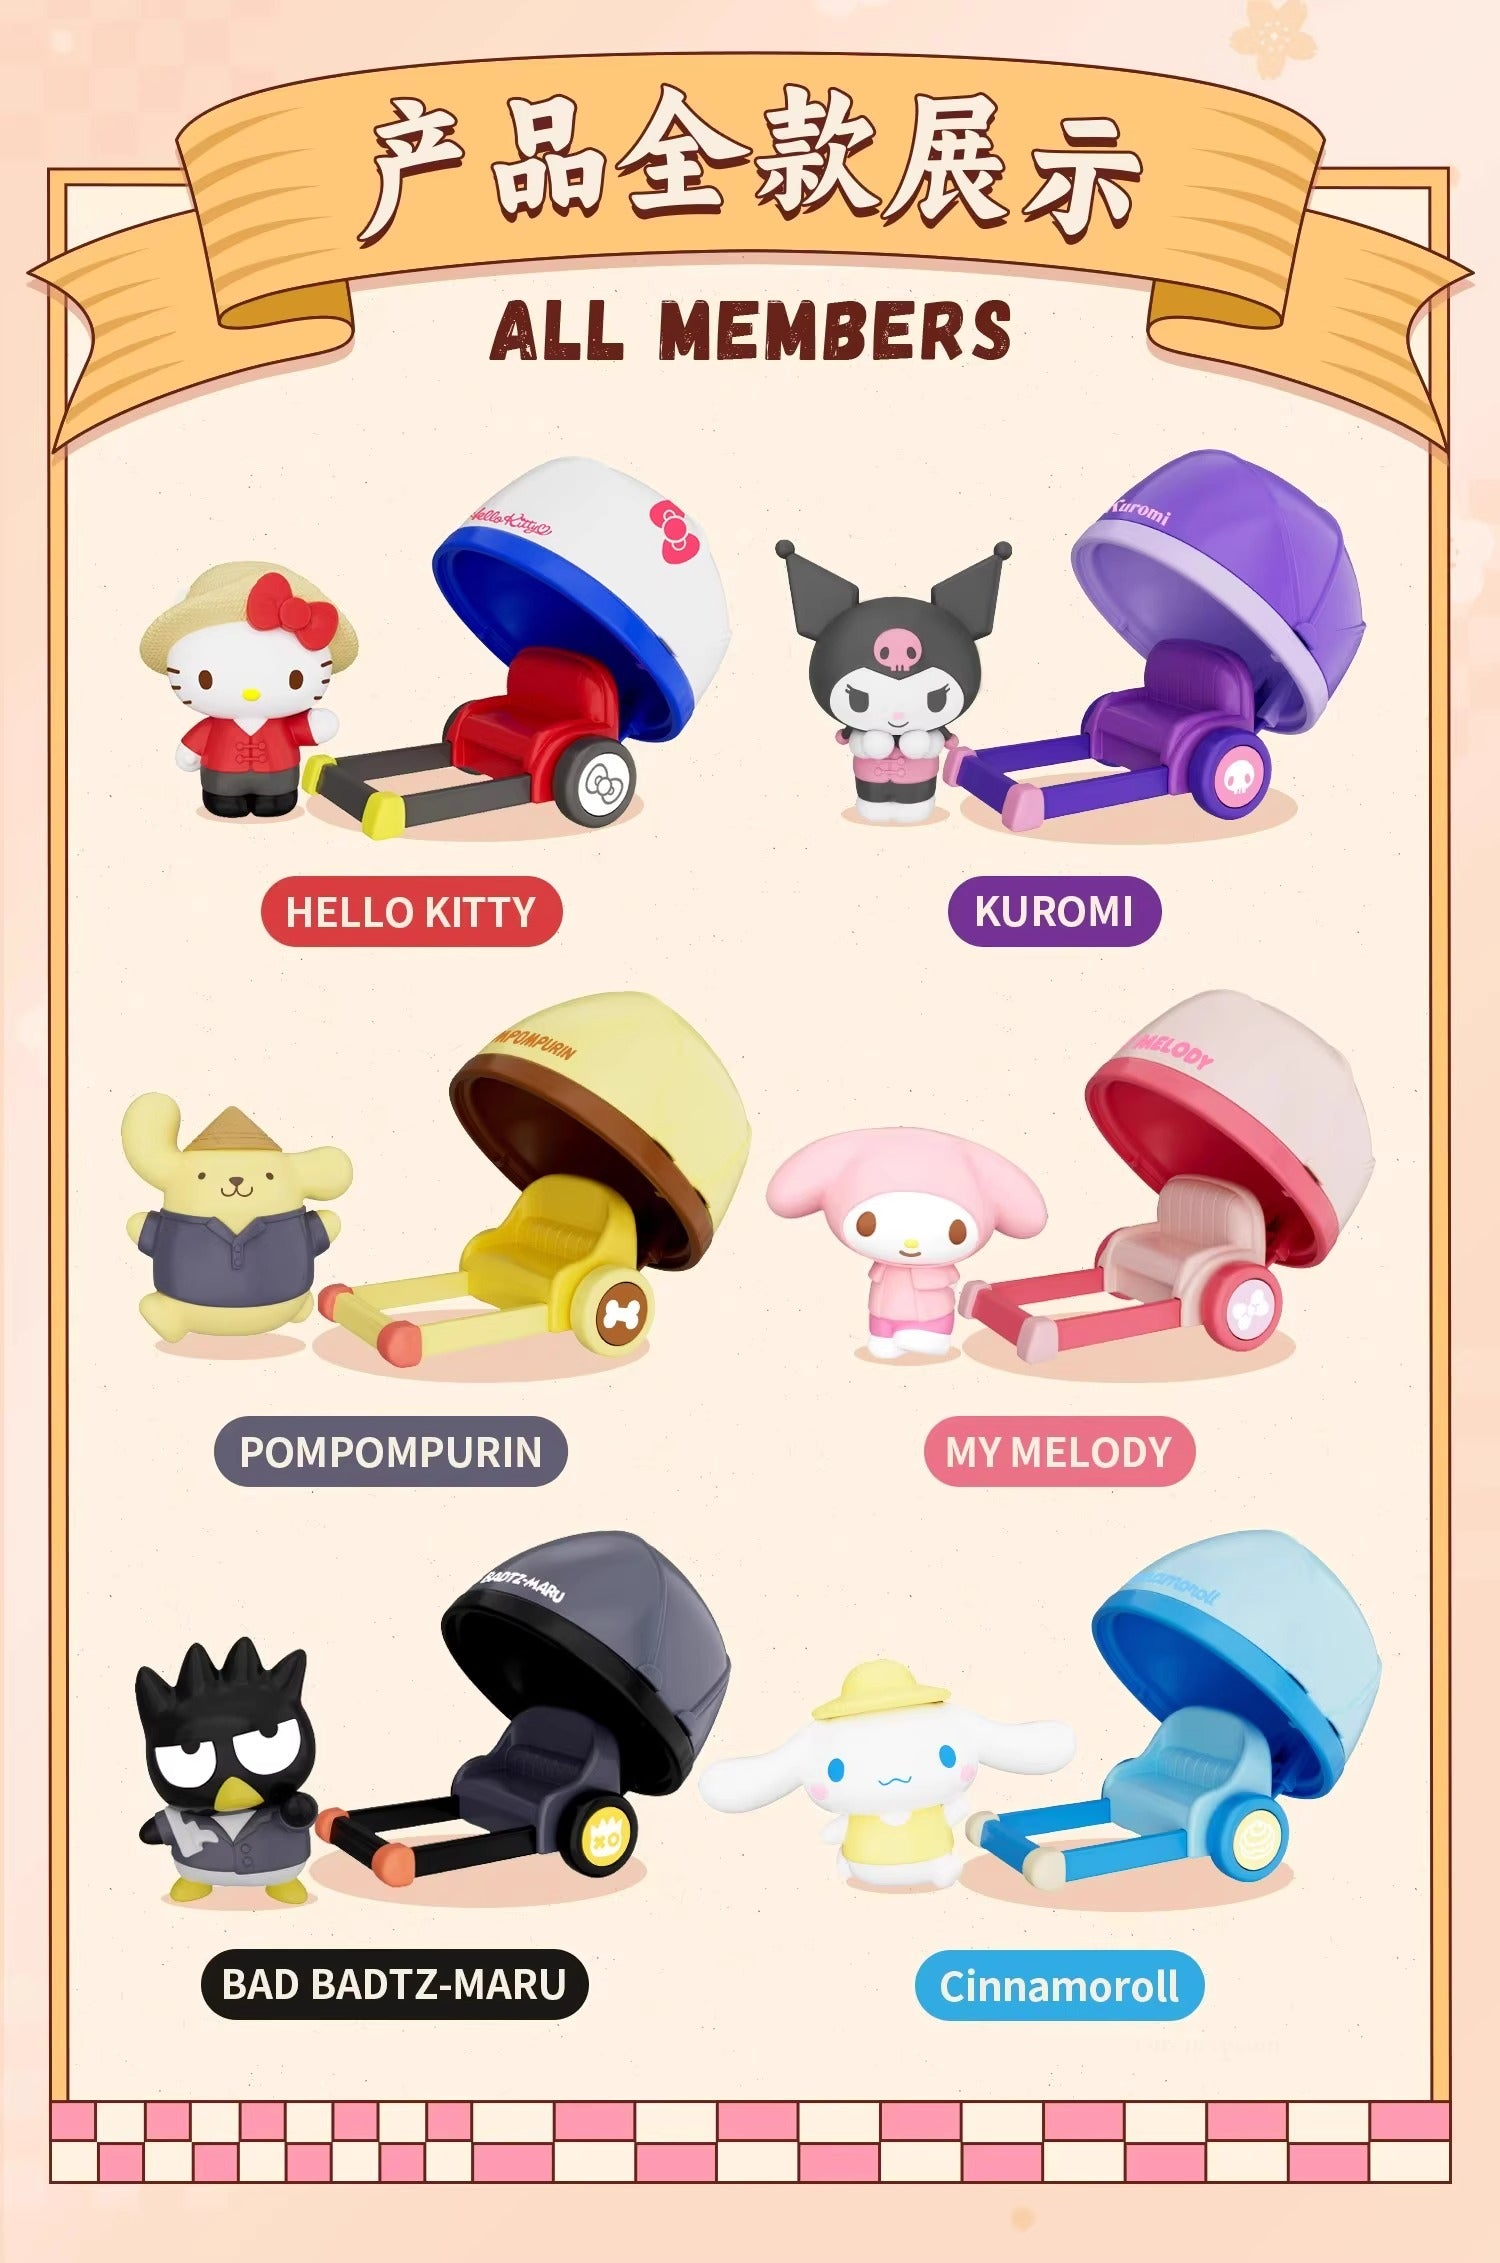 [LIOH] SANRIO - Travel In the Old Town Series Blind Box